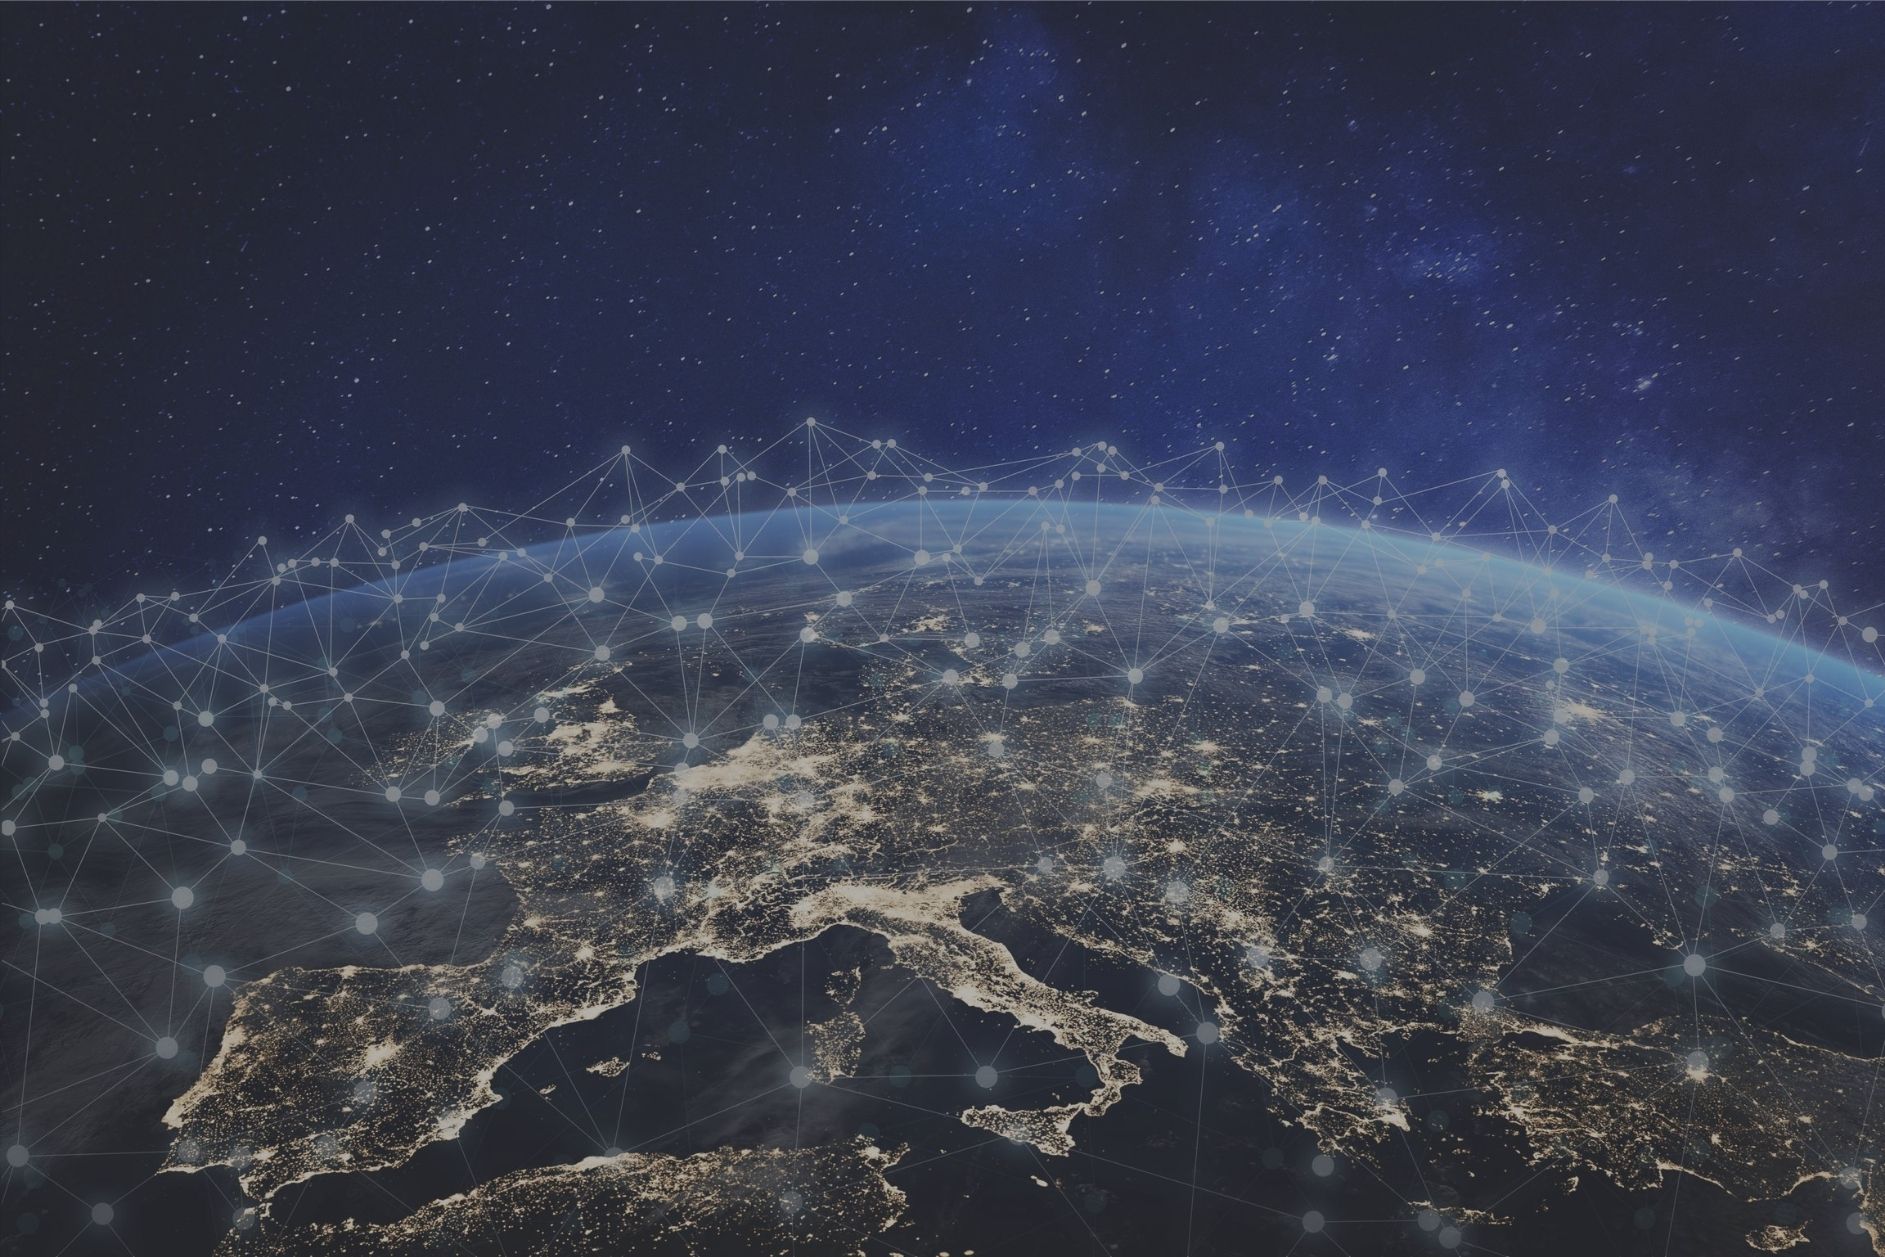 A view of Europe from space, with connecting lines to depict blockchain